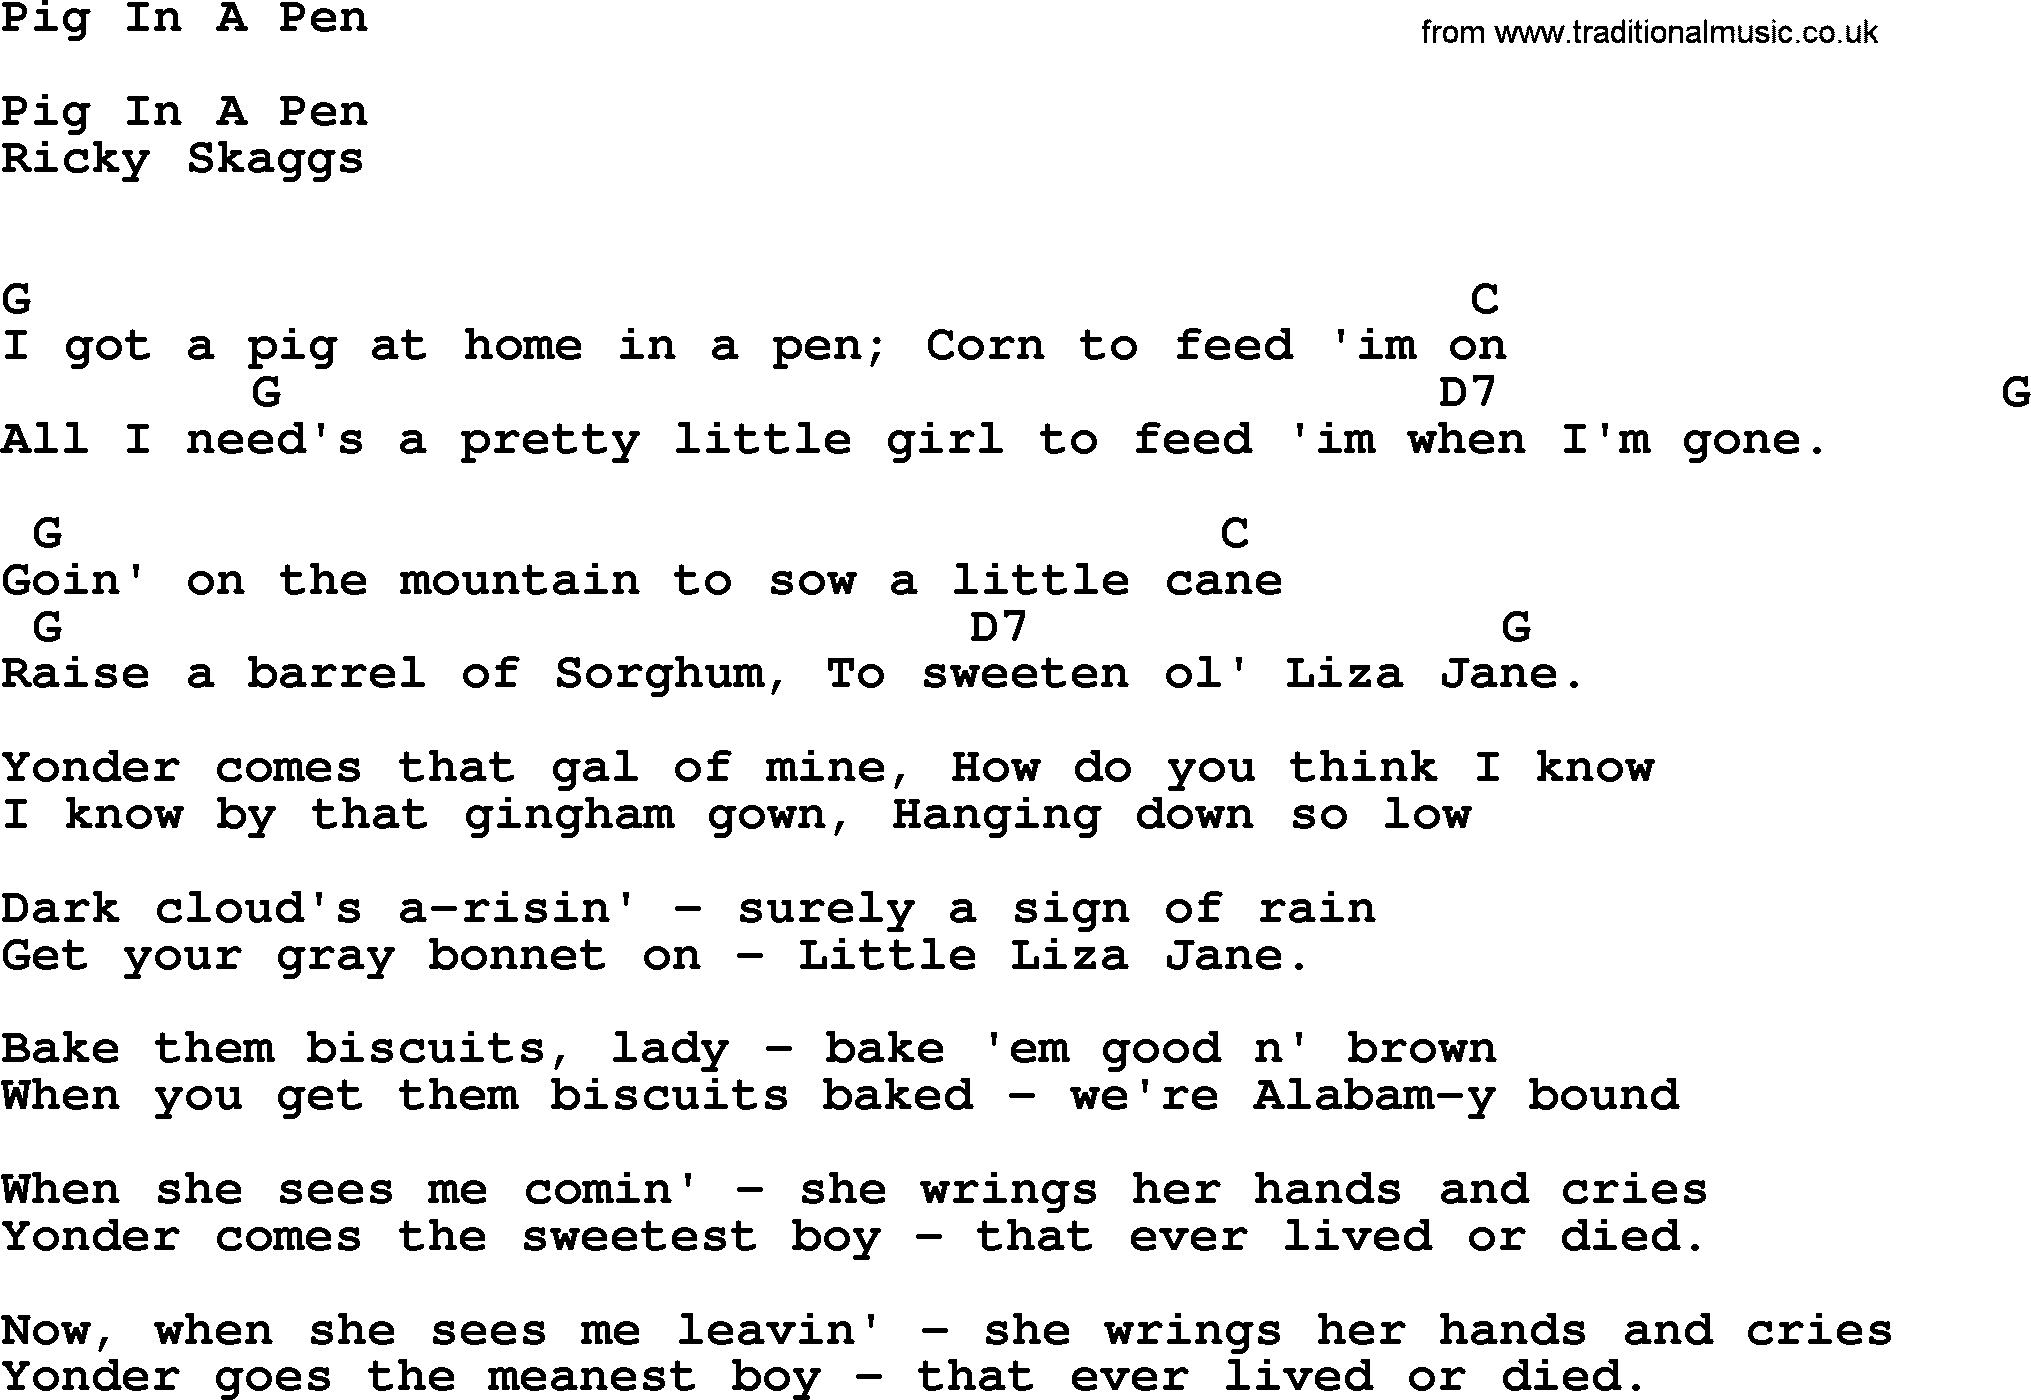 Bluegrass song: Pig In A Pen, lyrics and chords